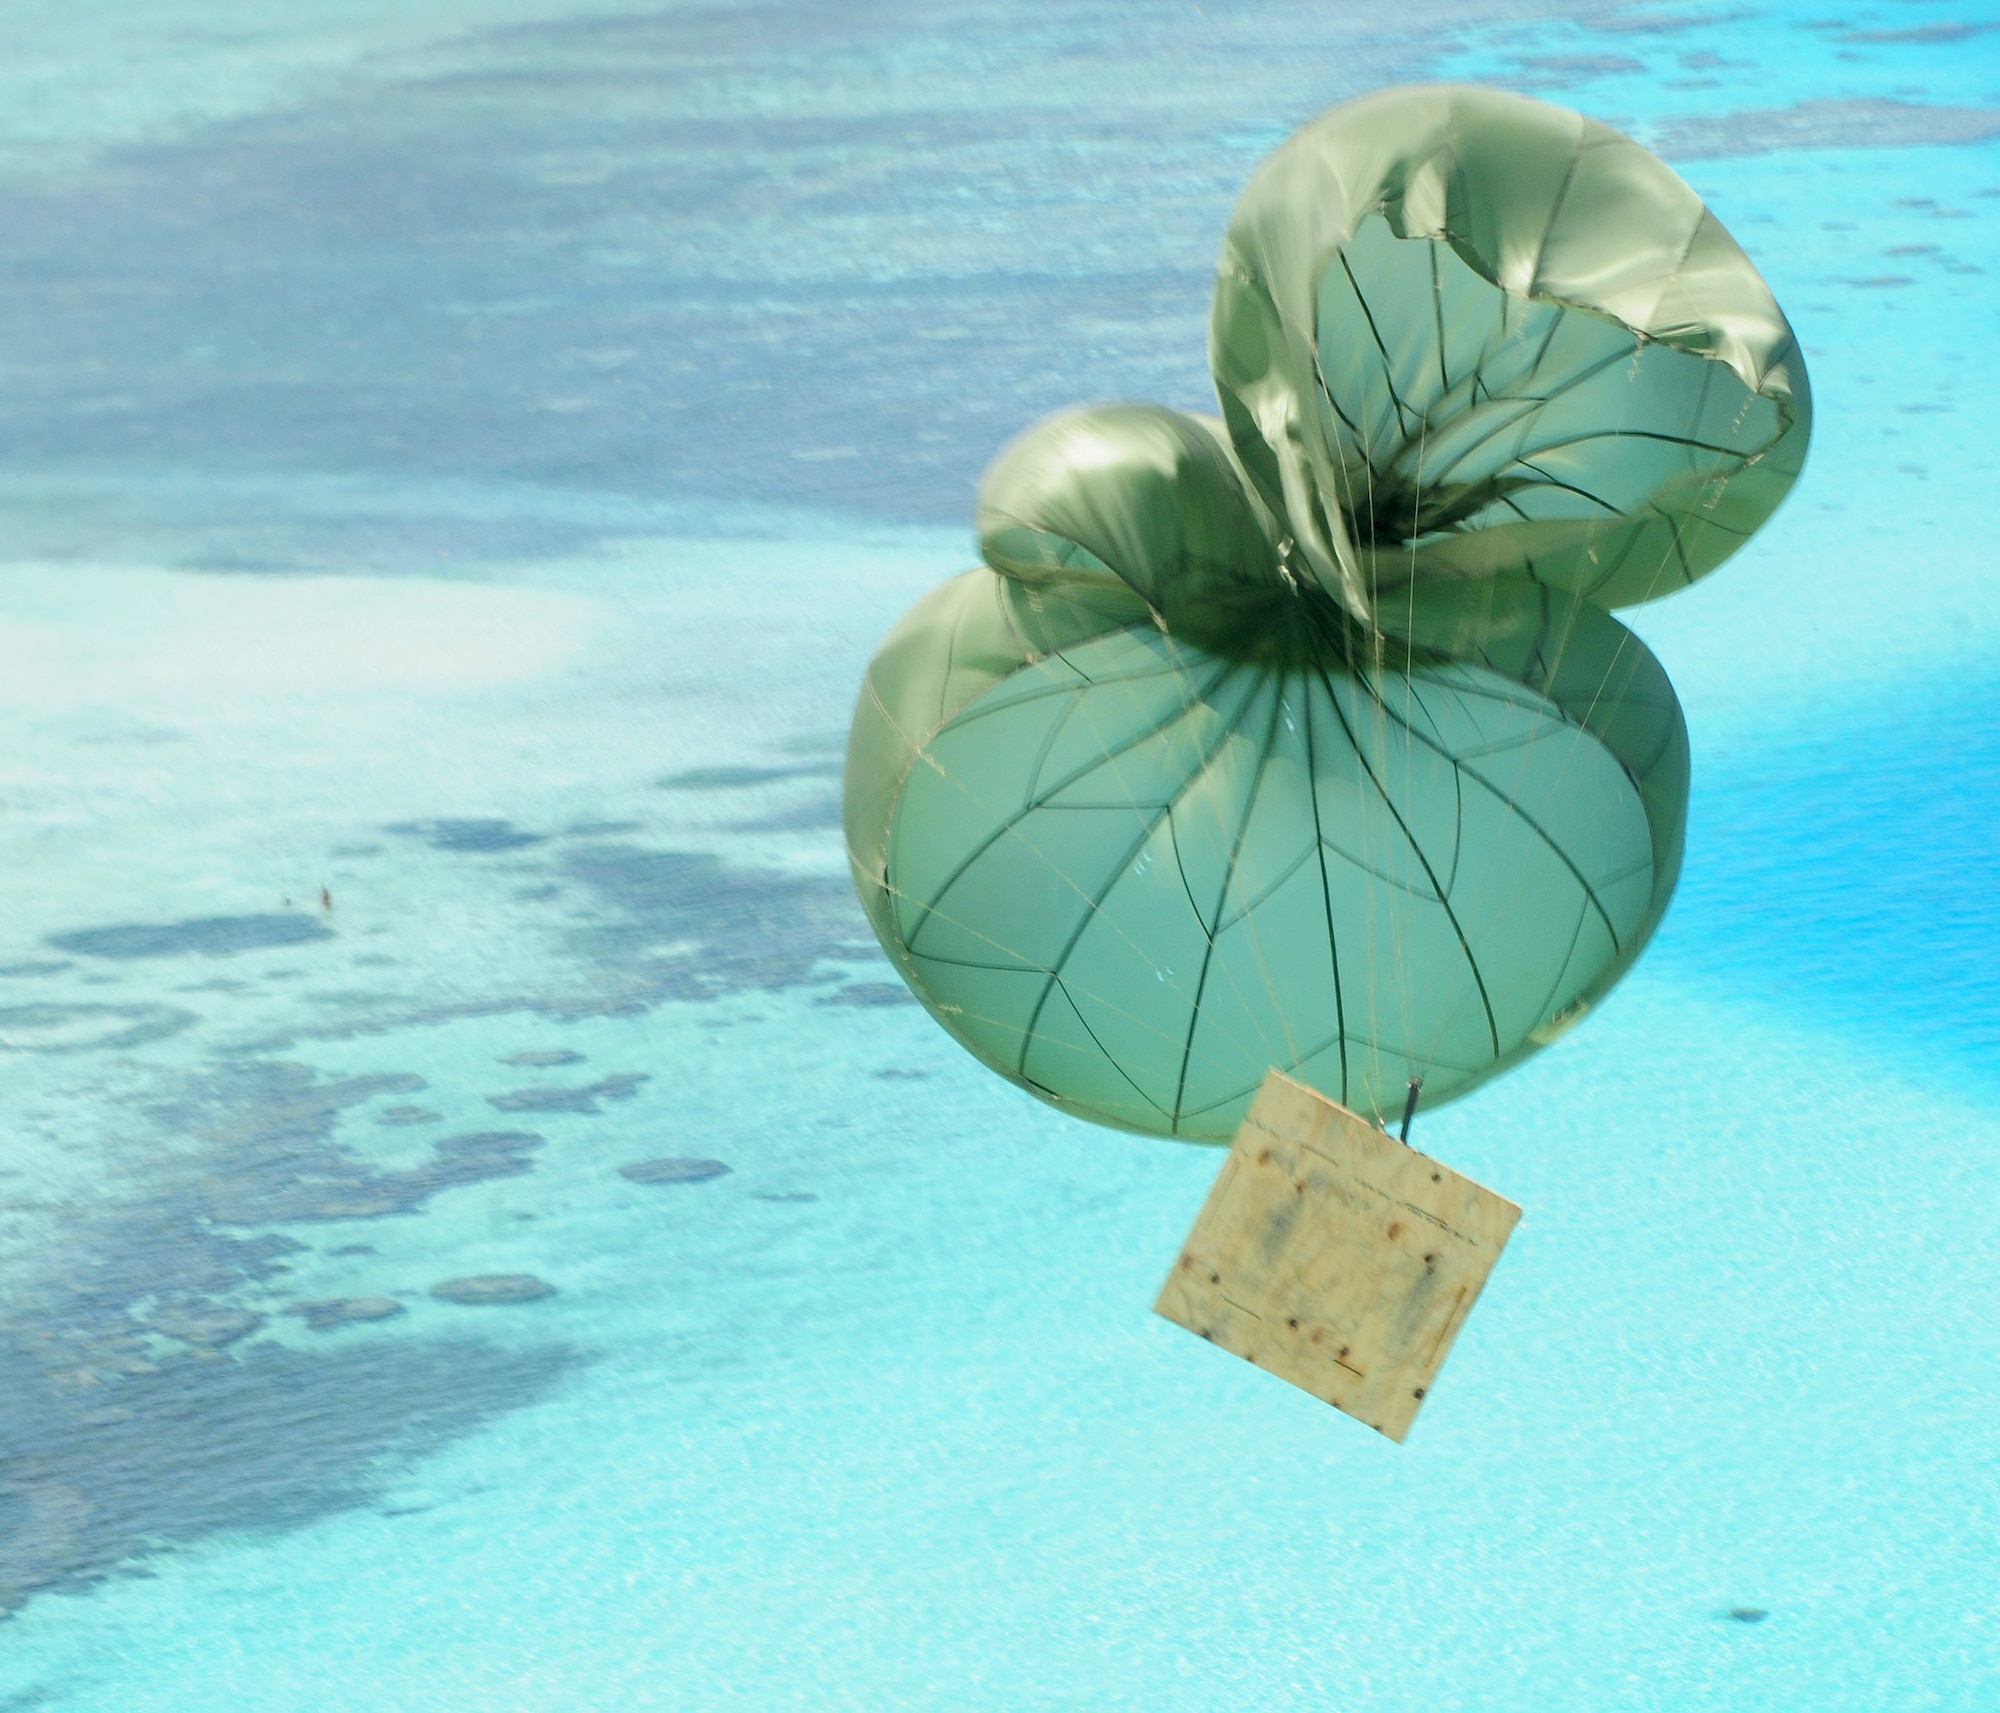 A box of humanitarian goods floats to the drop zone during Operation Christmas Drop Dec. 14, 2010, over the Yap Islands, Commonwealth of the Northern Marianas Islands. Operation Christmas Drop began in 1952 and is the Air Force’s longest-running humanitarian operation. (U.S. Air Force photo/Senior Airman Nichelle Anderson)